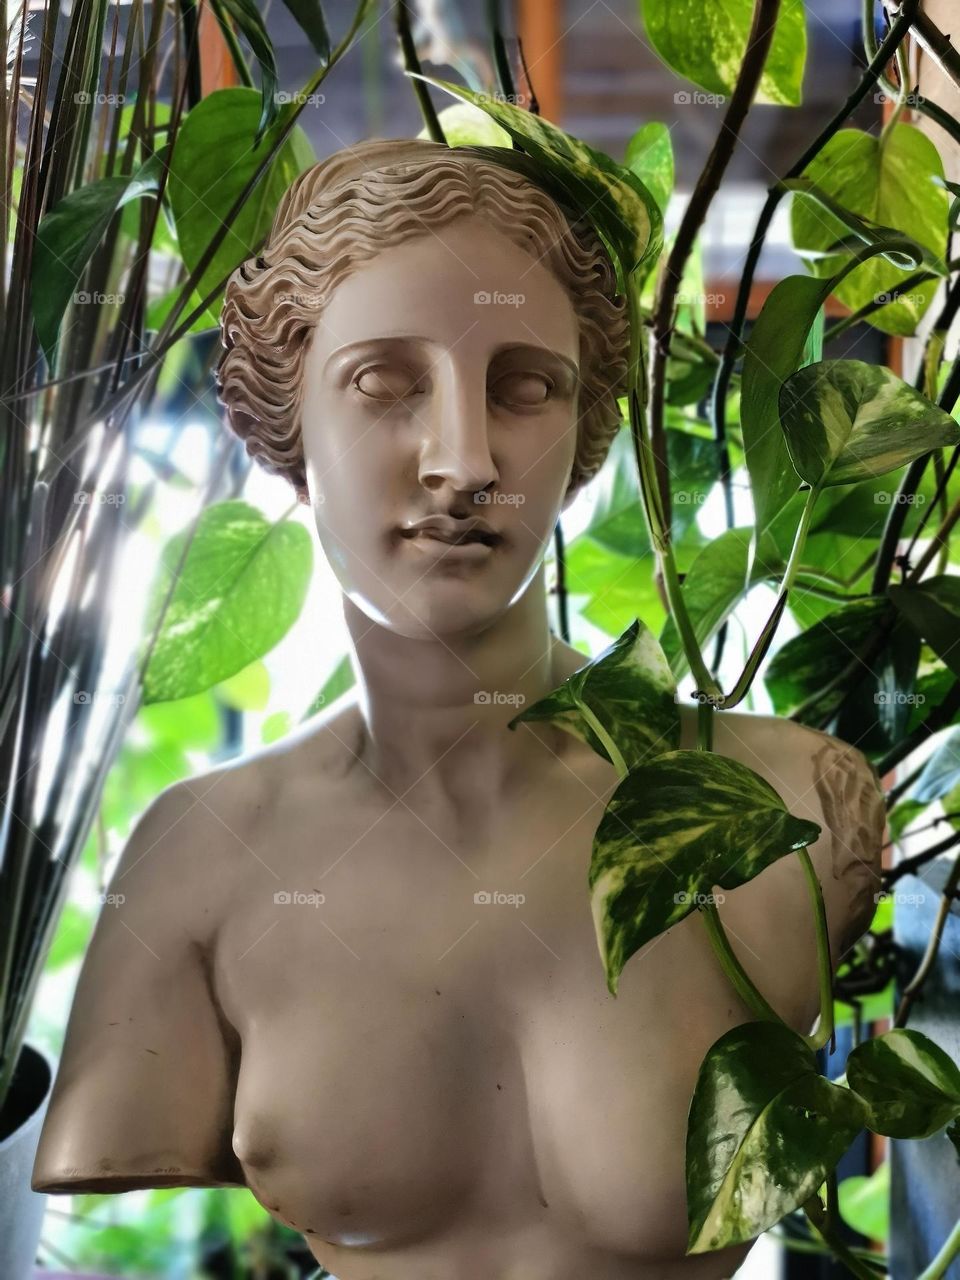 Plants around us. Greek sculpture surrounded by green plants.